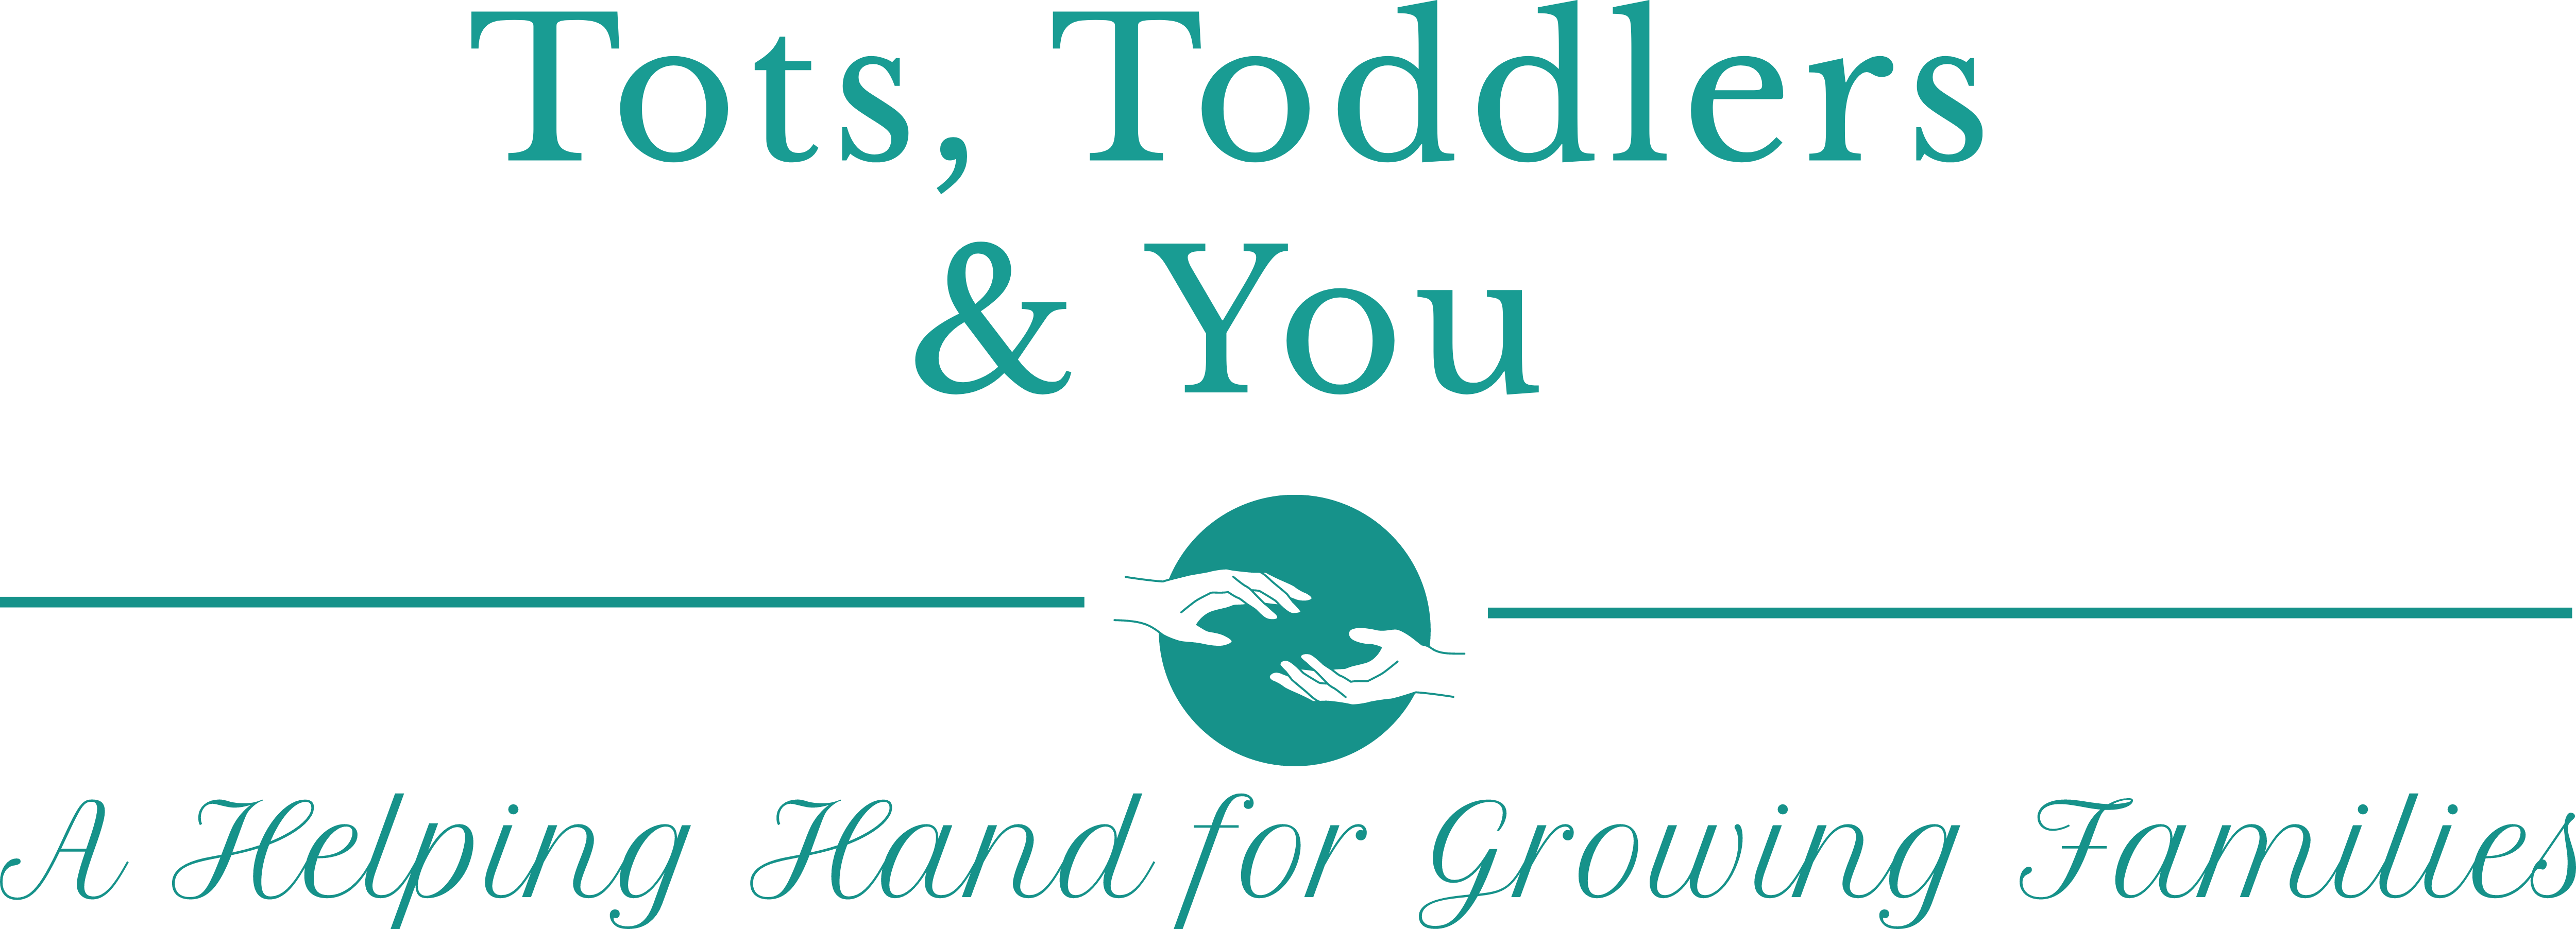 Tots to Toddlers's logo